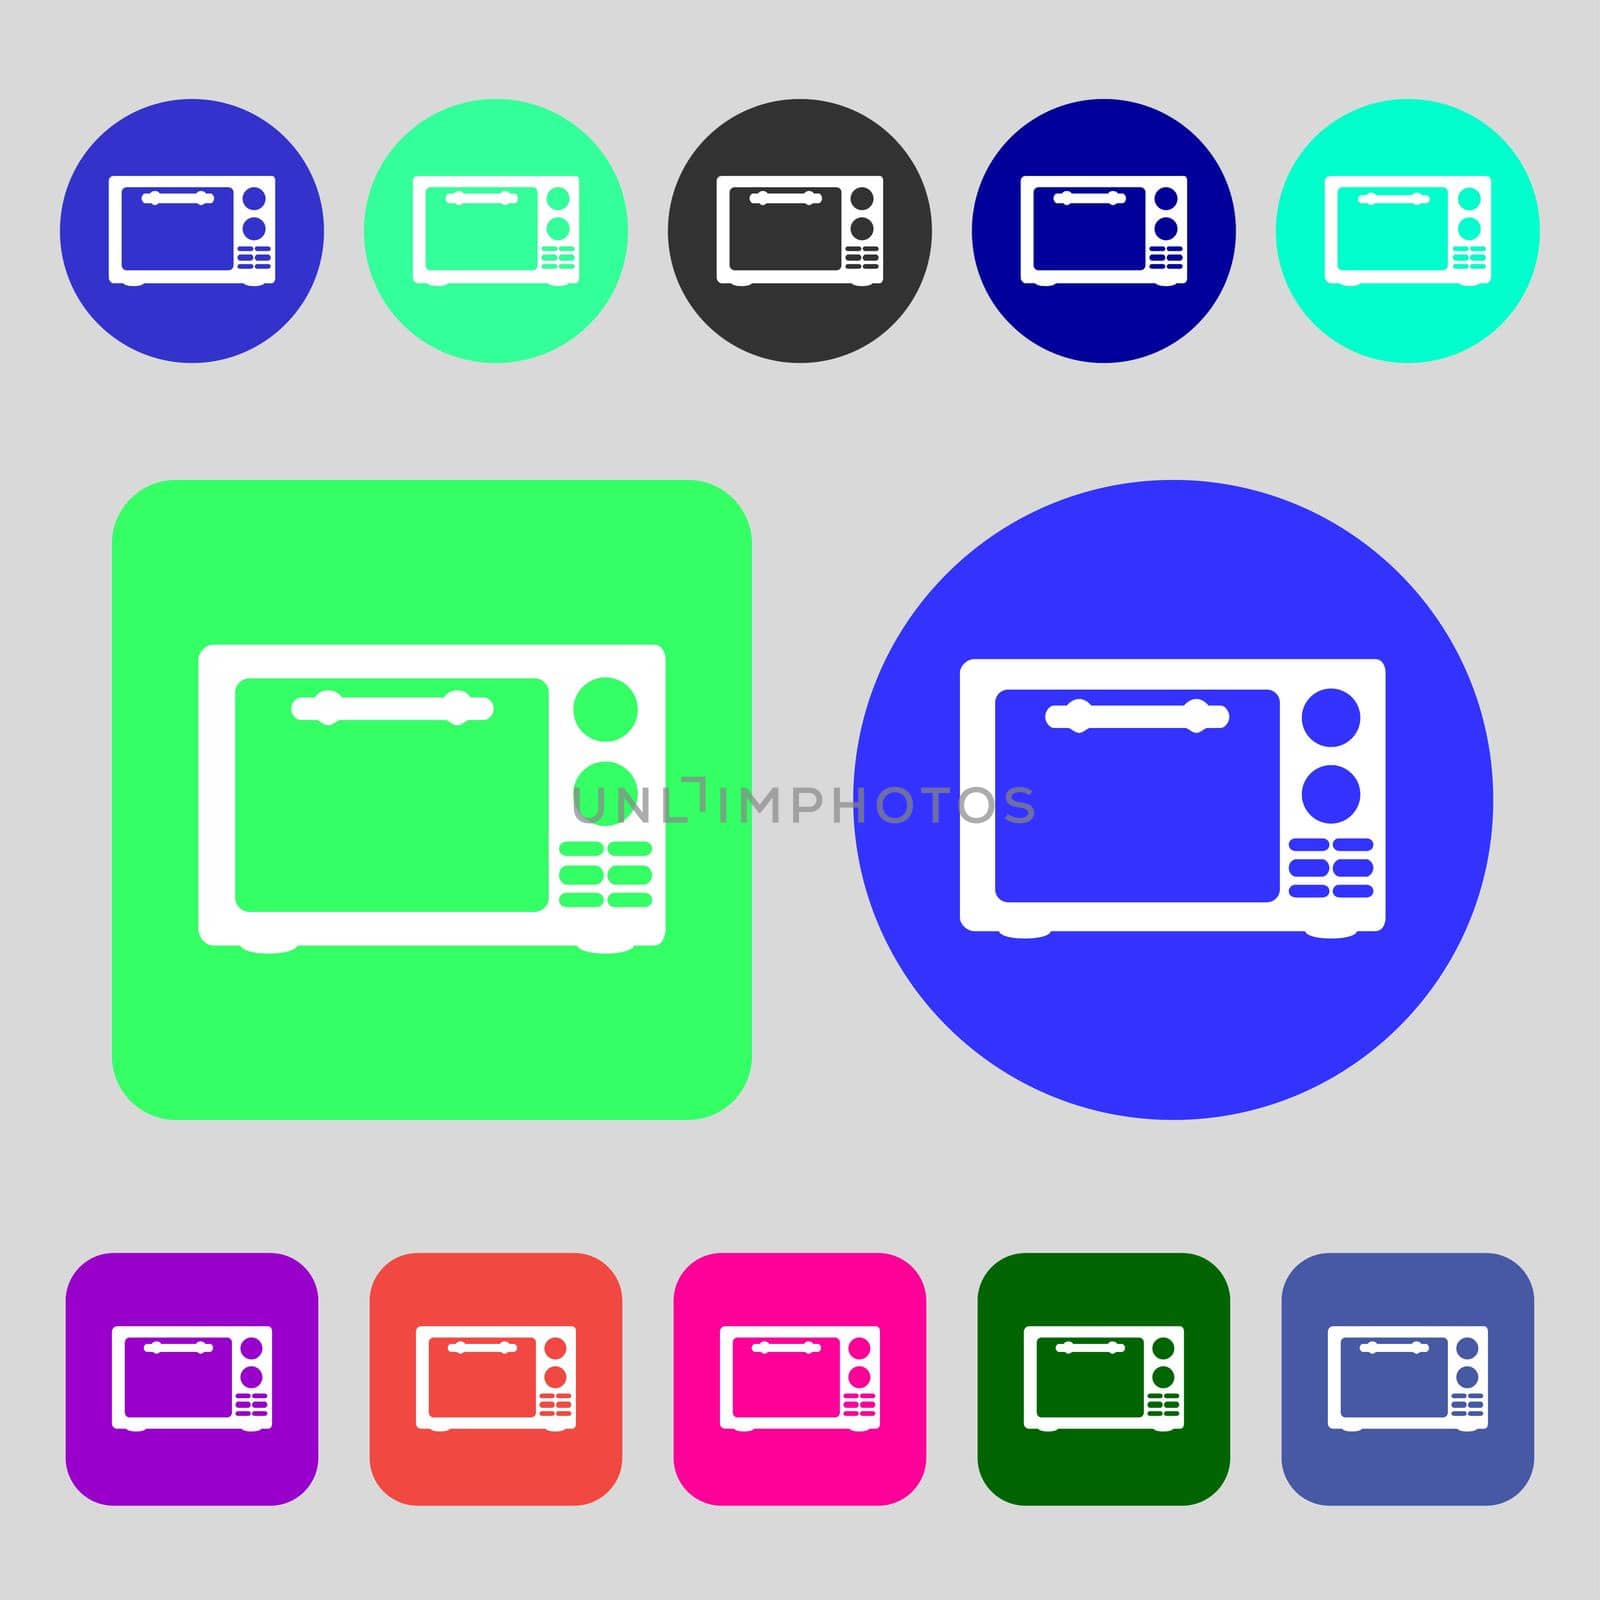 Microwave oven sign icon. Kitchen electric stove symbol. 12 colored buttons. Flat design.  by serhii_lohvyniuk